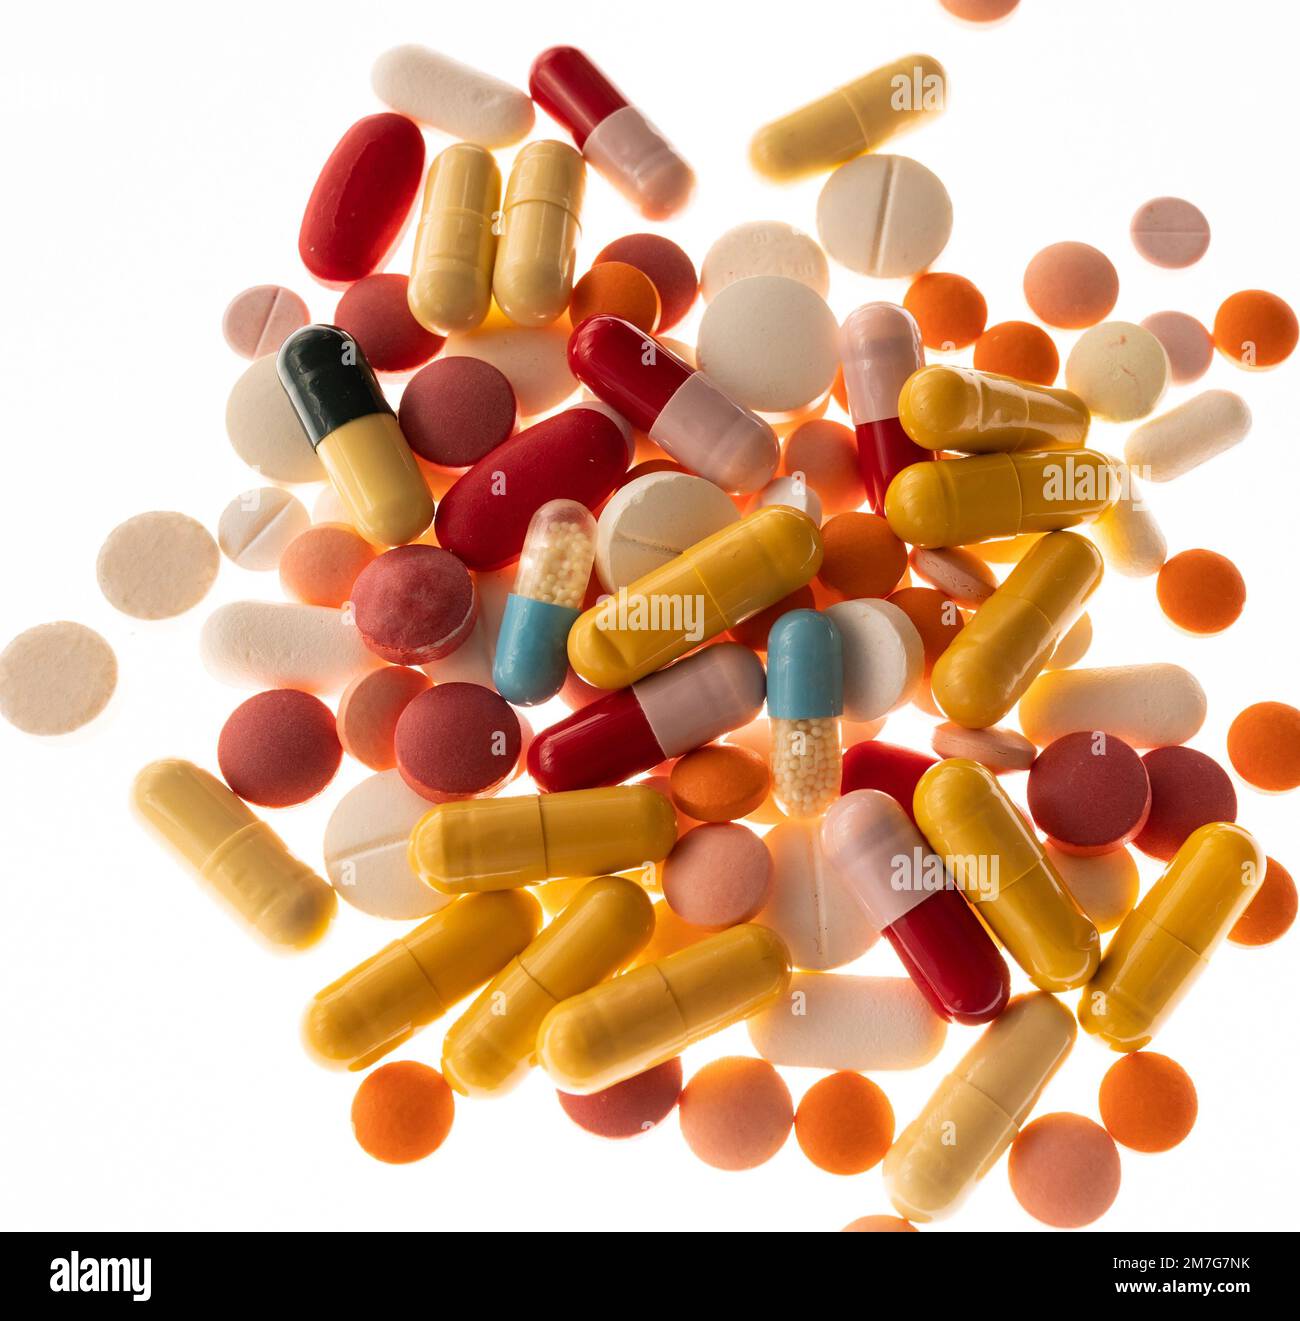 Pile of different medicaments pills, capsules, isolated on white background Stock Photo